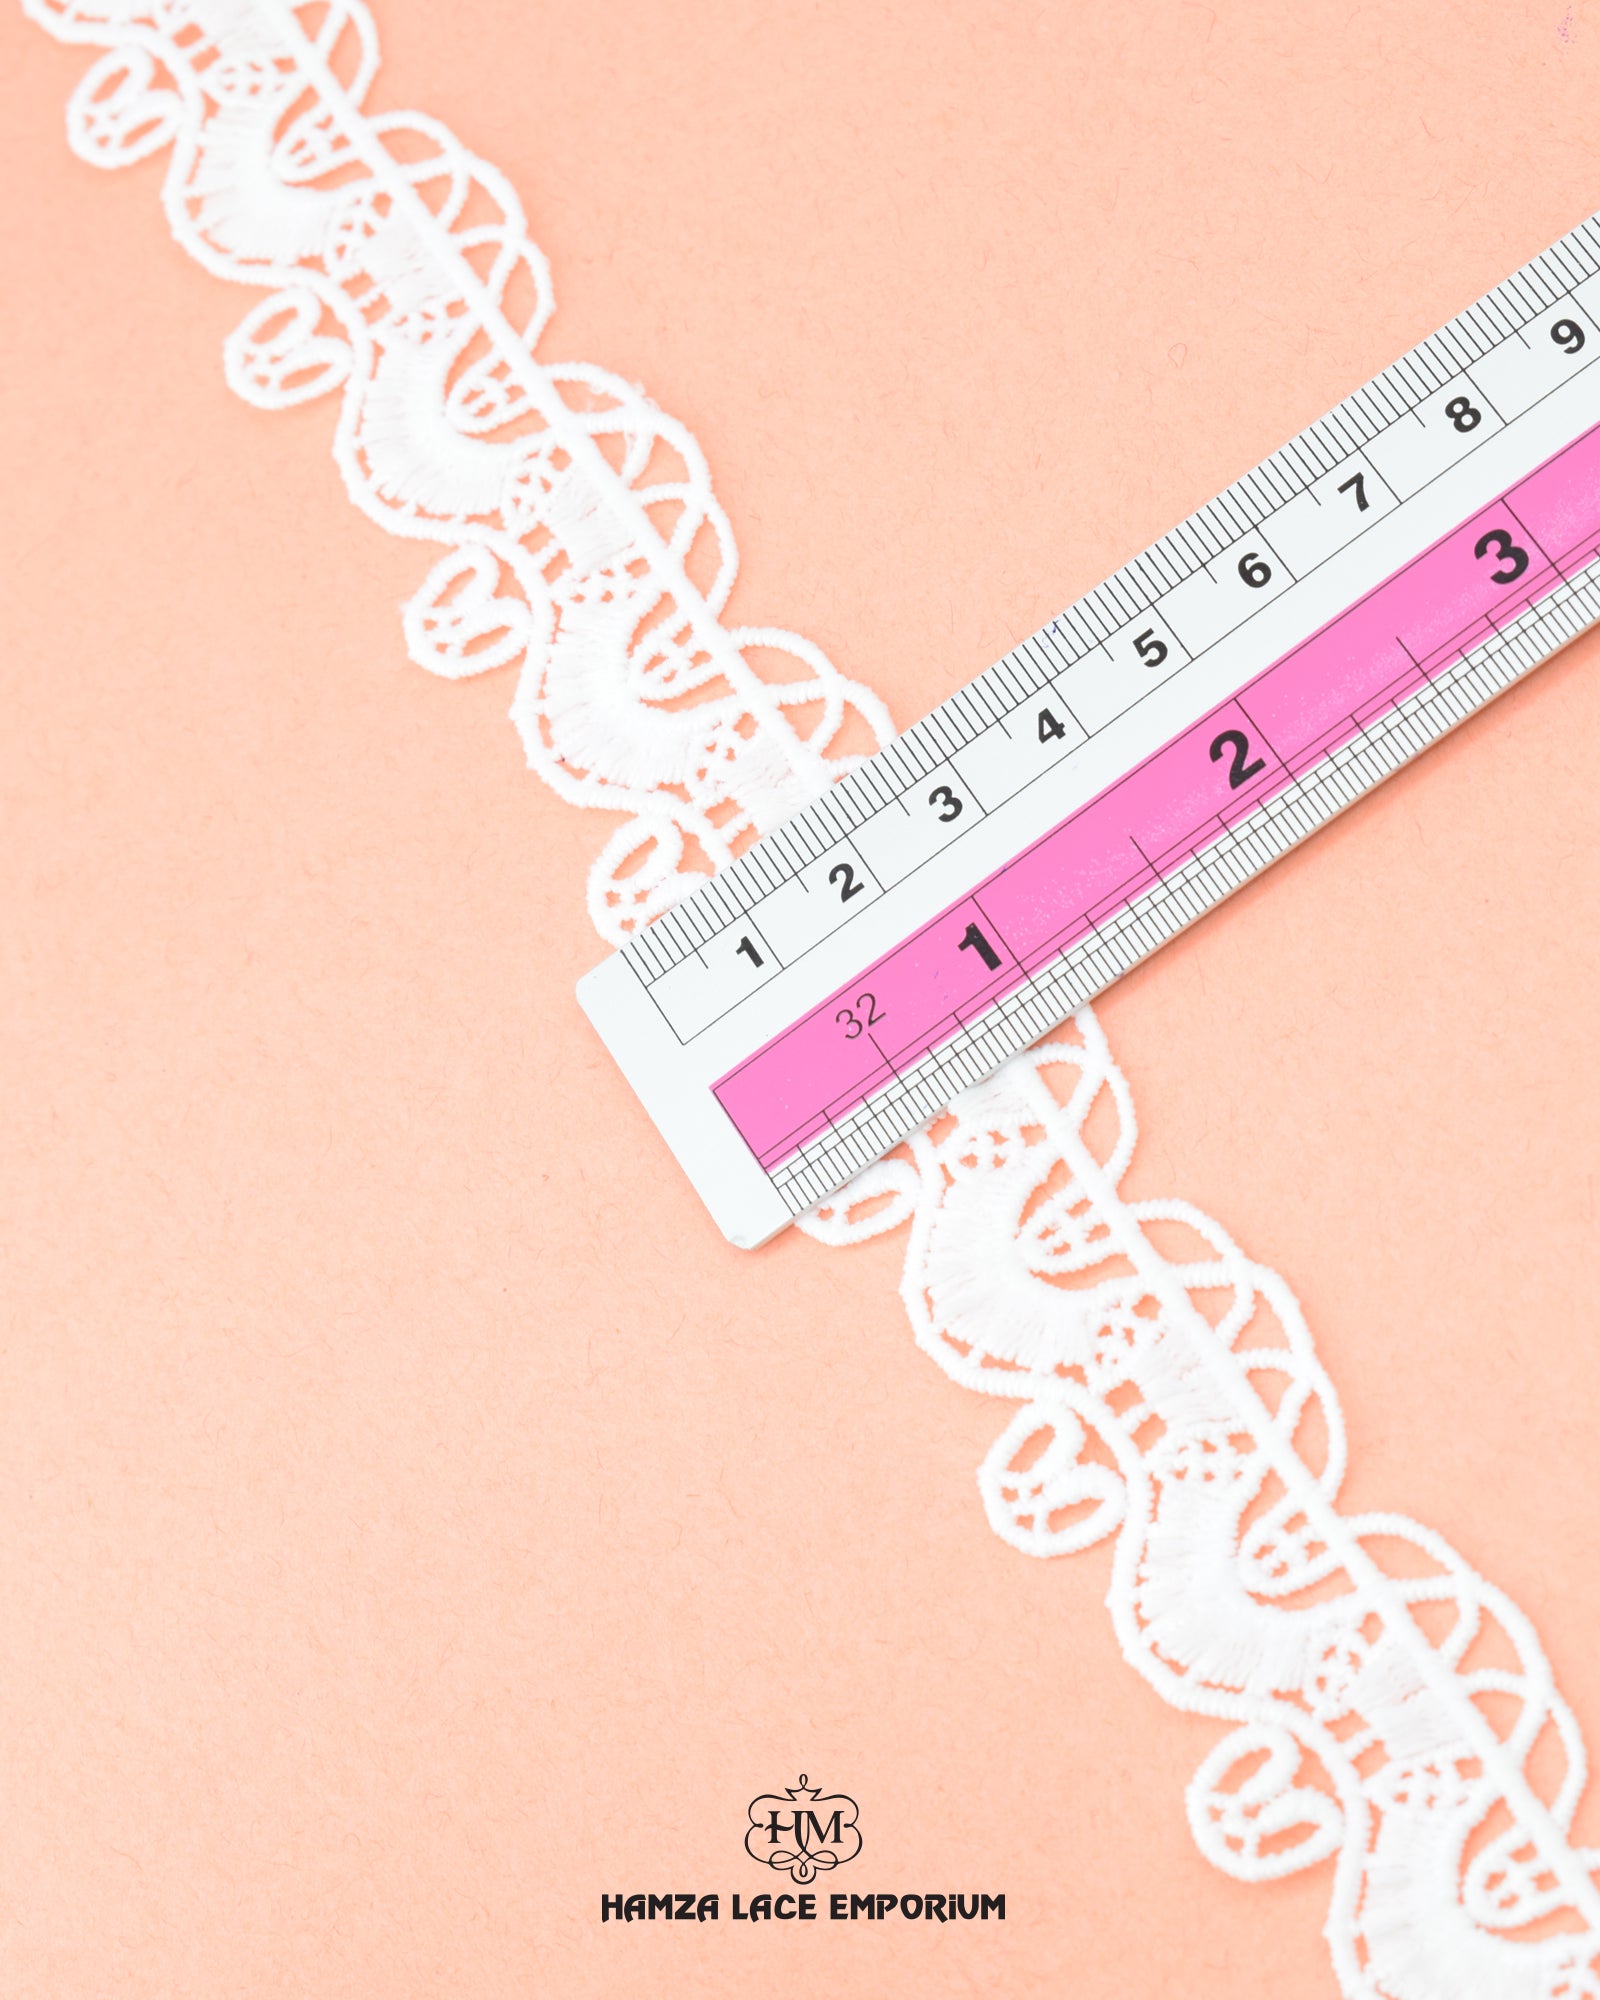 Size of the 'Edging Scallop Lace 23278' is shown as '1.25' inches with the help of a ruler